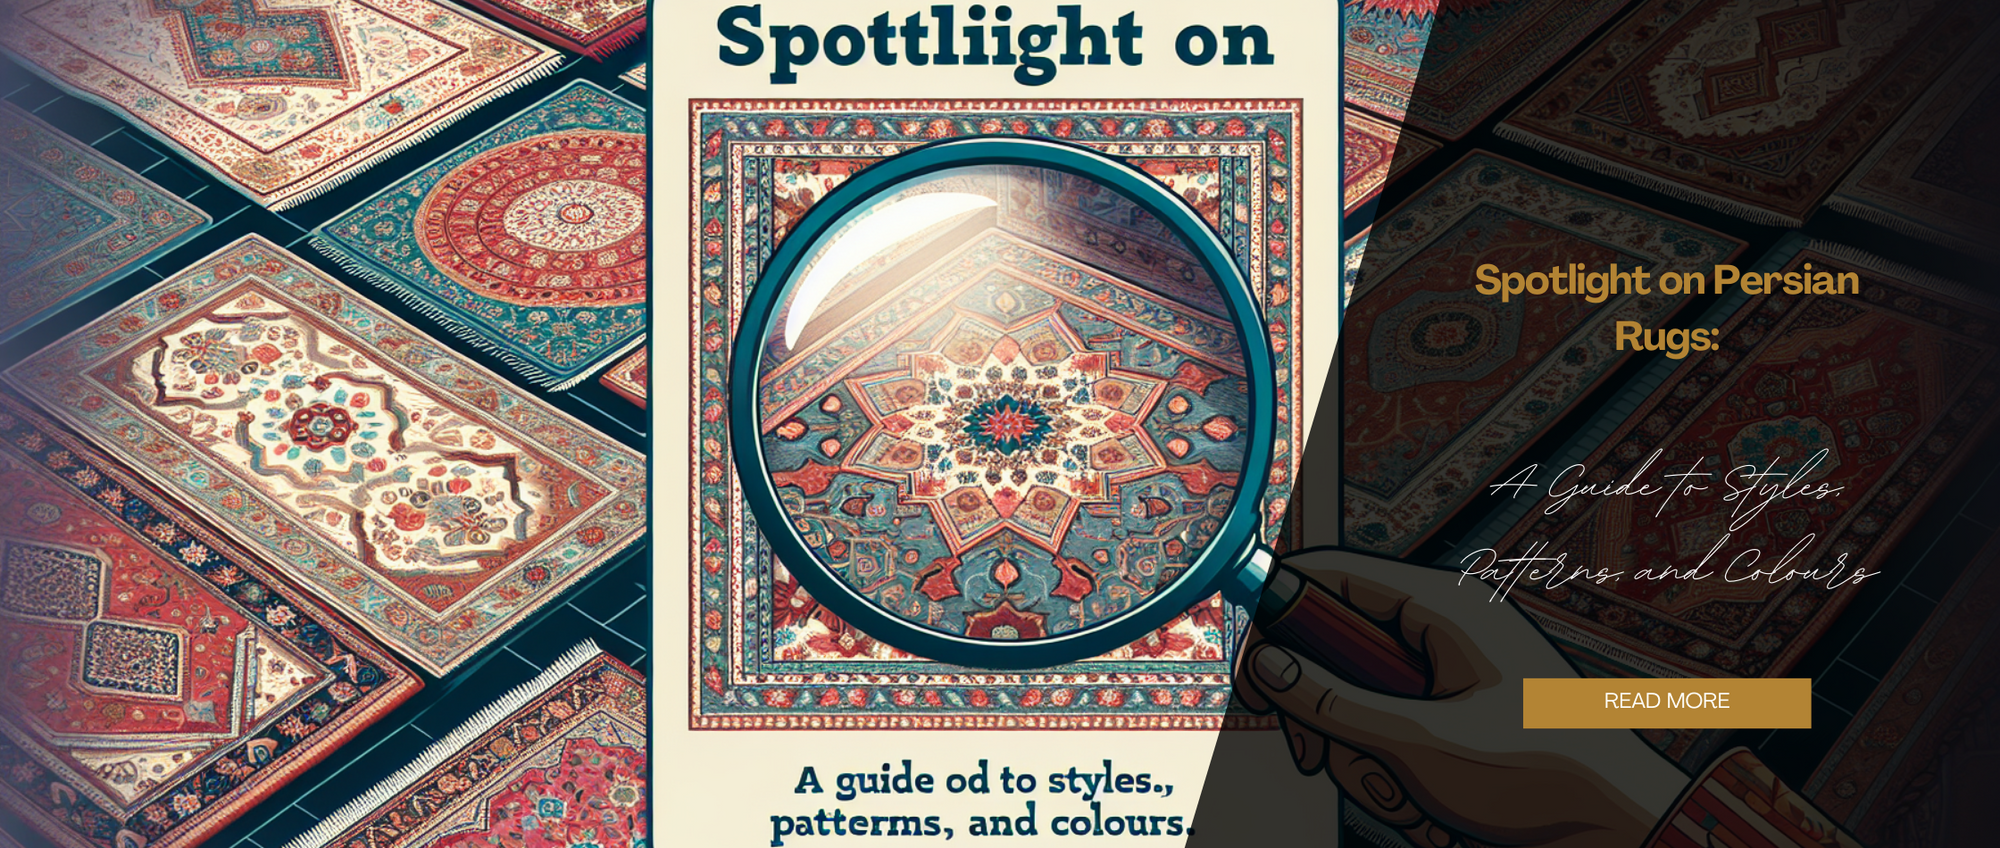 Spotlight on Persian Rugs: A Guide to Styles, Patterns, and Colours